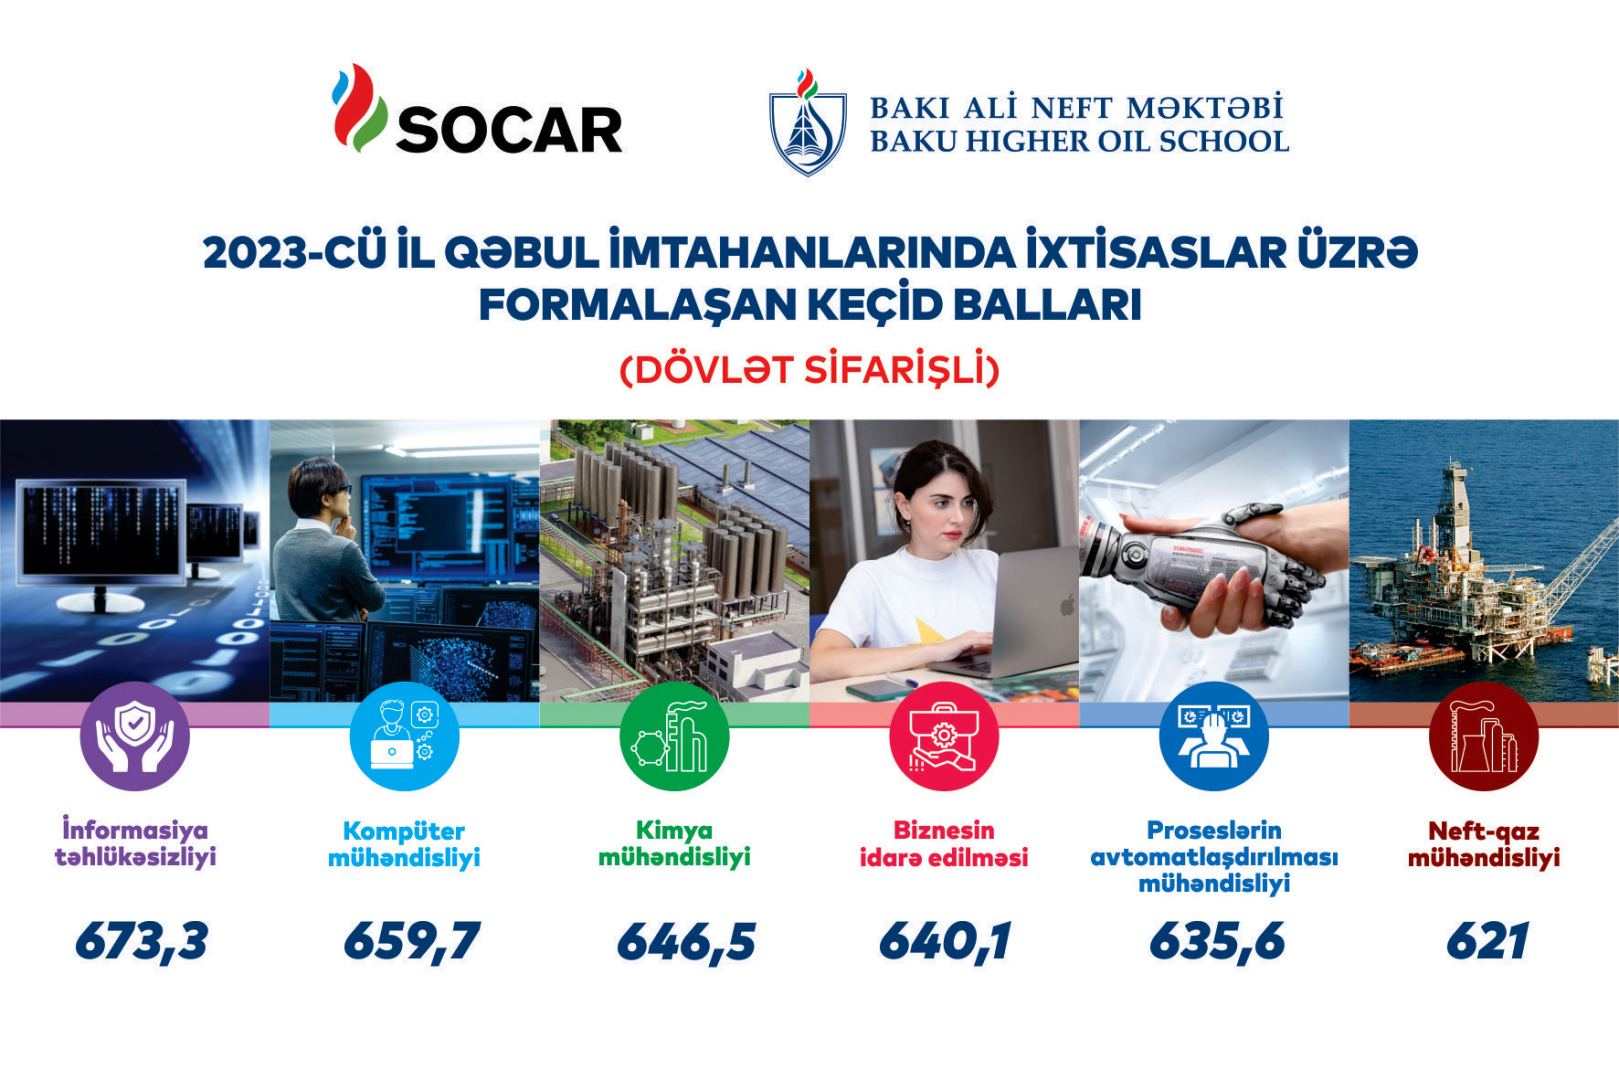 Baku Higher Oil School continues to lead with the highest passing score (PHOTO)